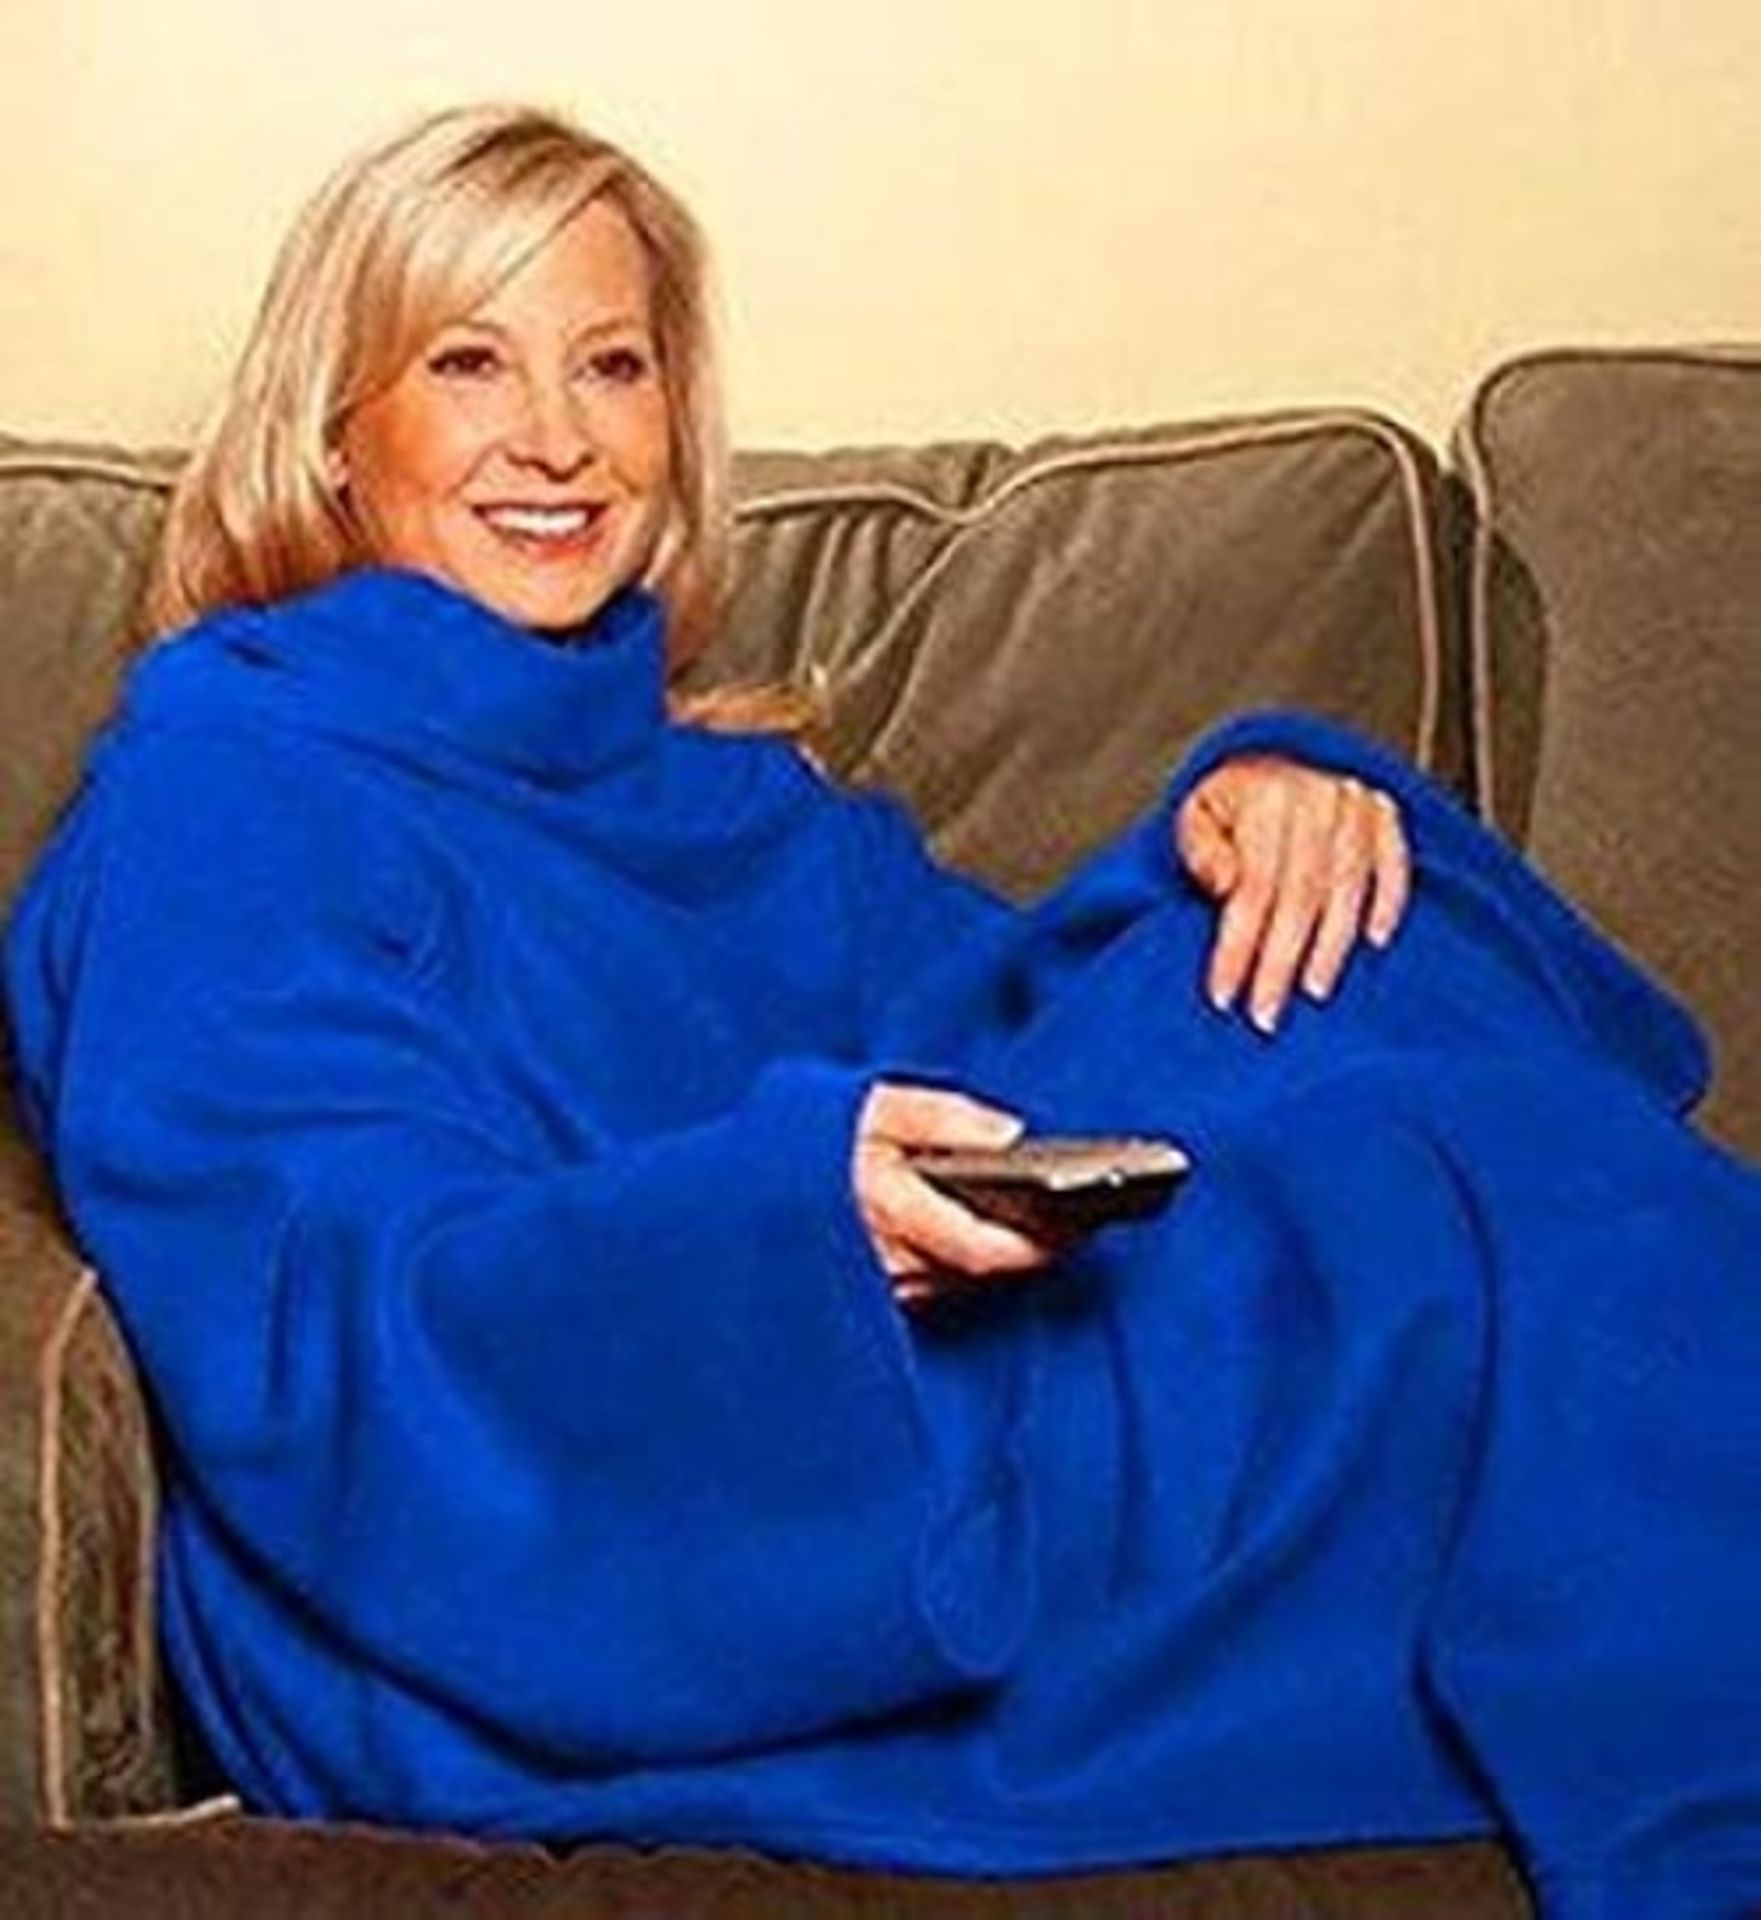 6 x New Supersoft Comfy Blanket (Colour may differ) RRP 18.